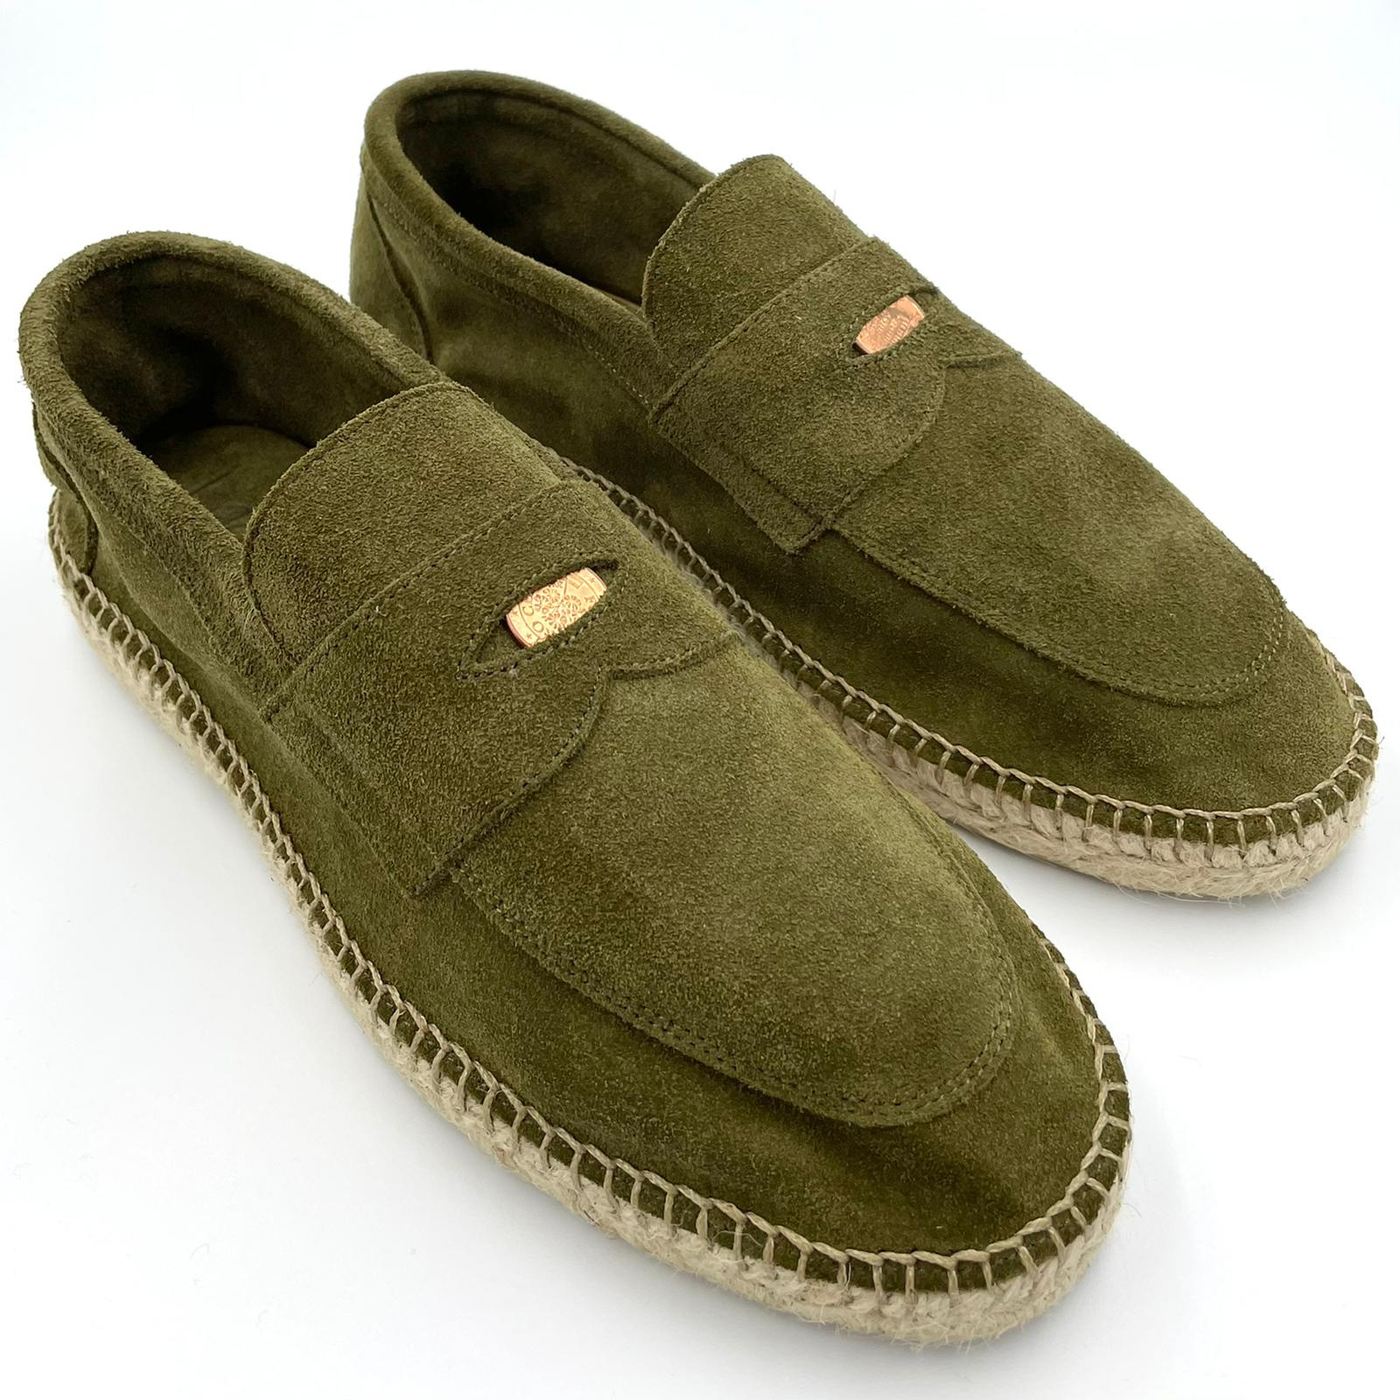 Gotstyle Fashion - Lagoa Shoes Suede Leather Penny Loafer - Green